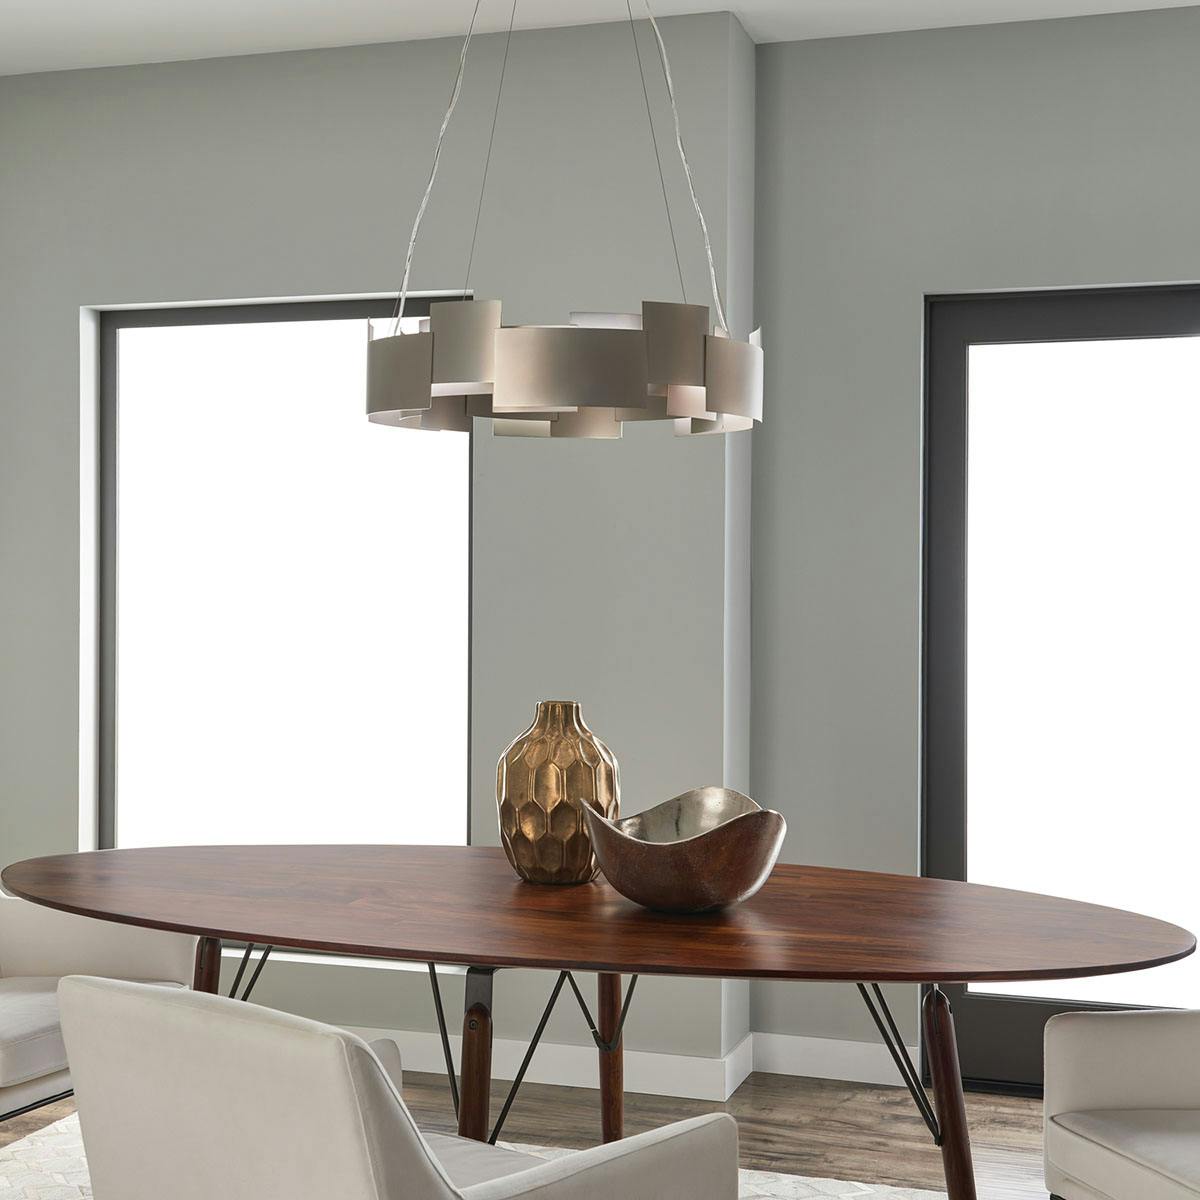 Day time dining room image featuring Moderne pendant 42992SNLED